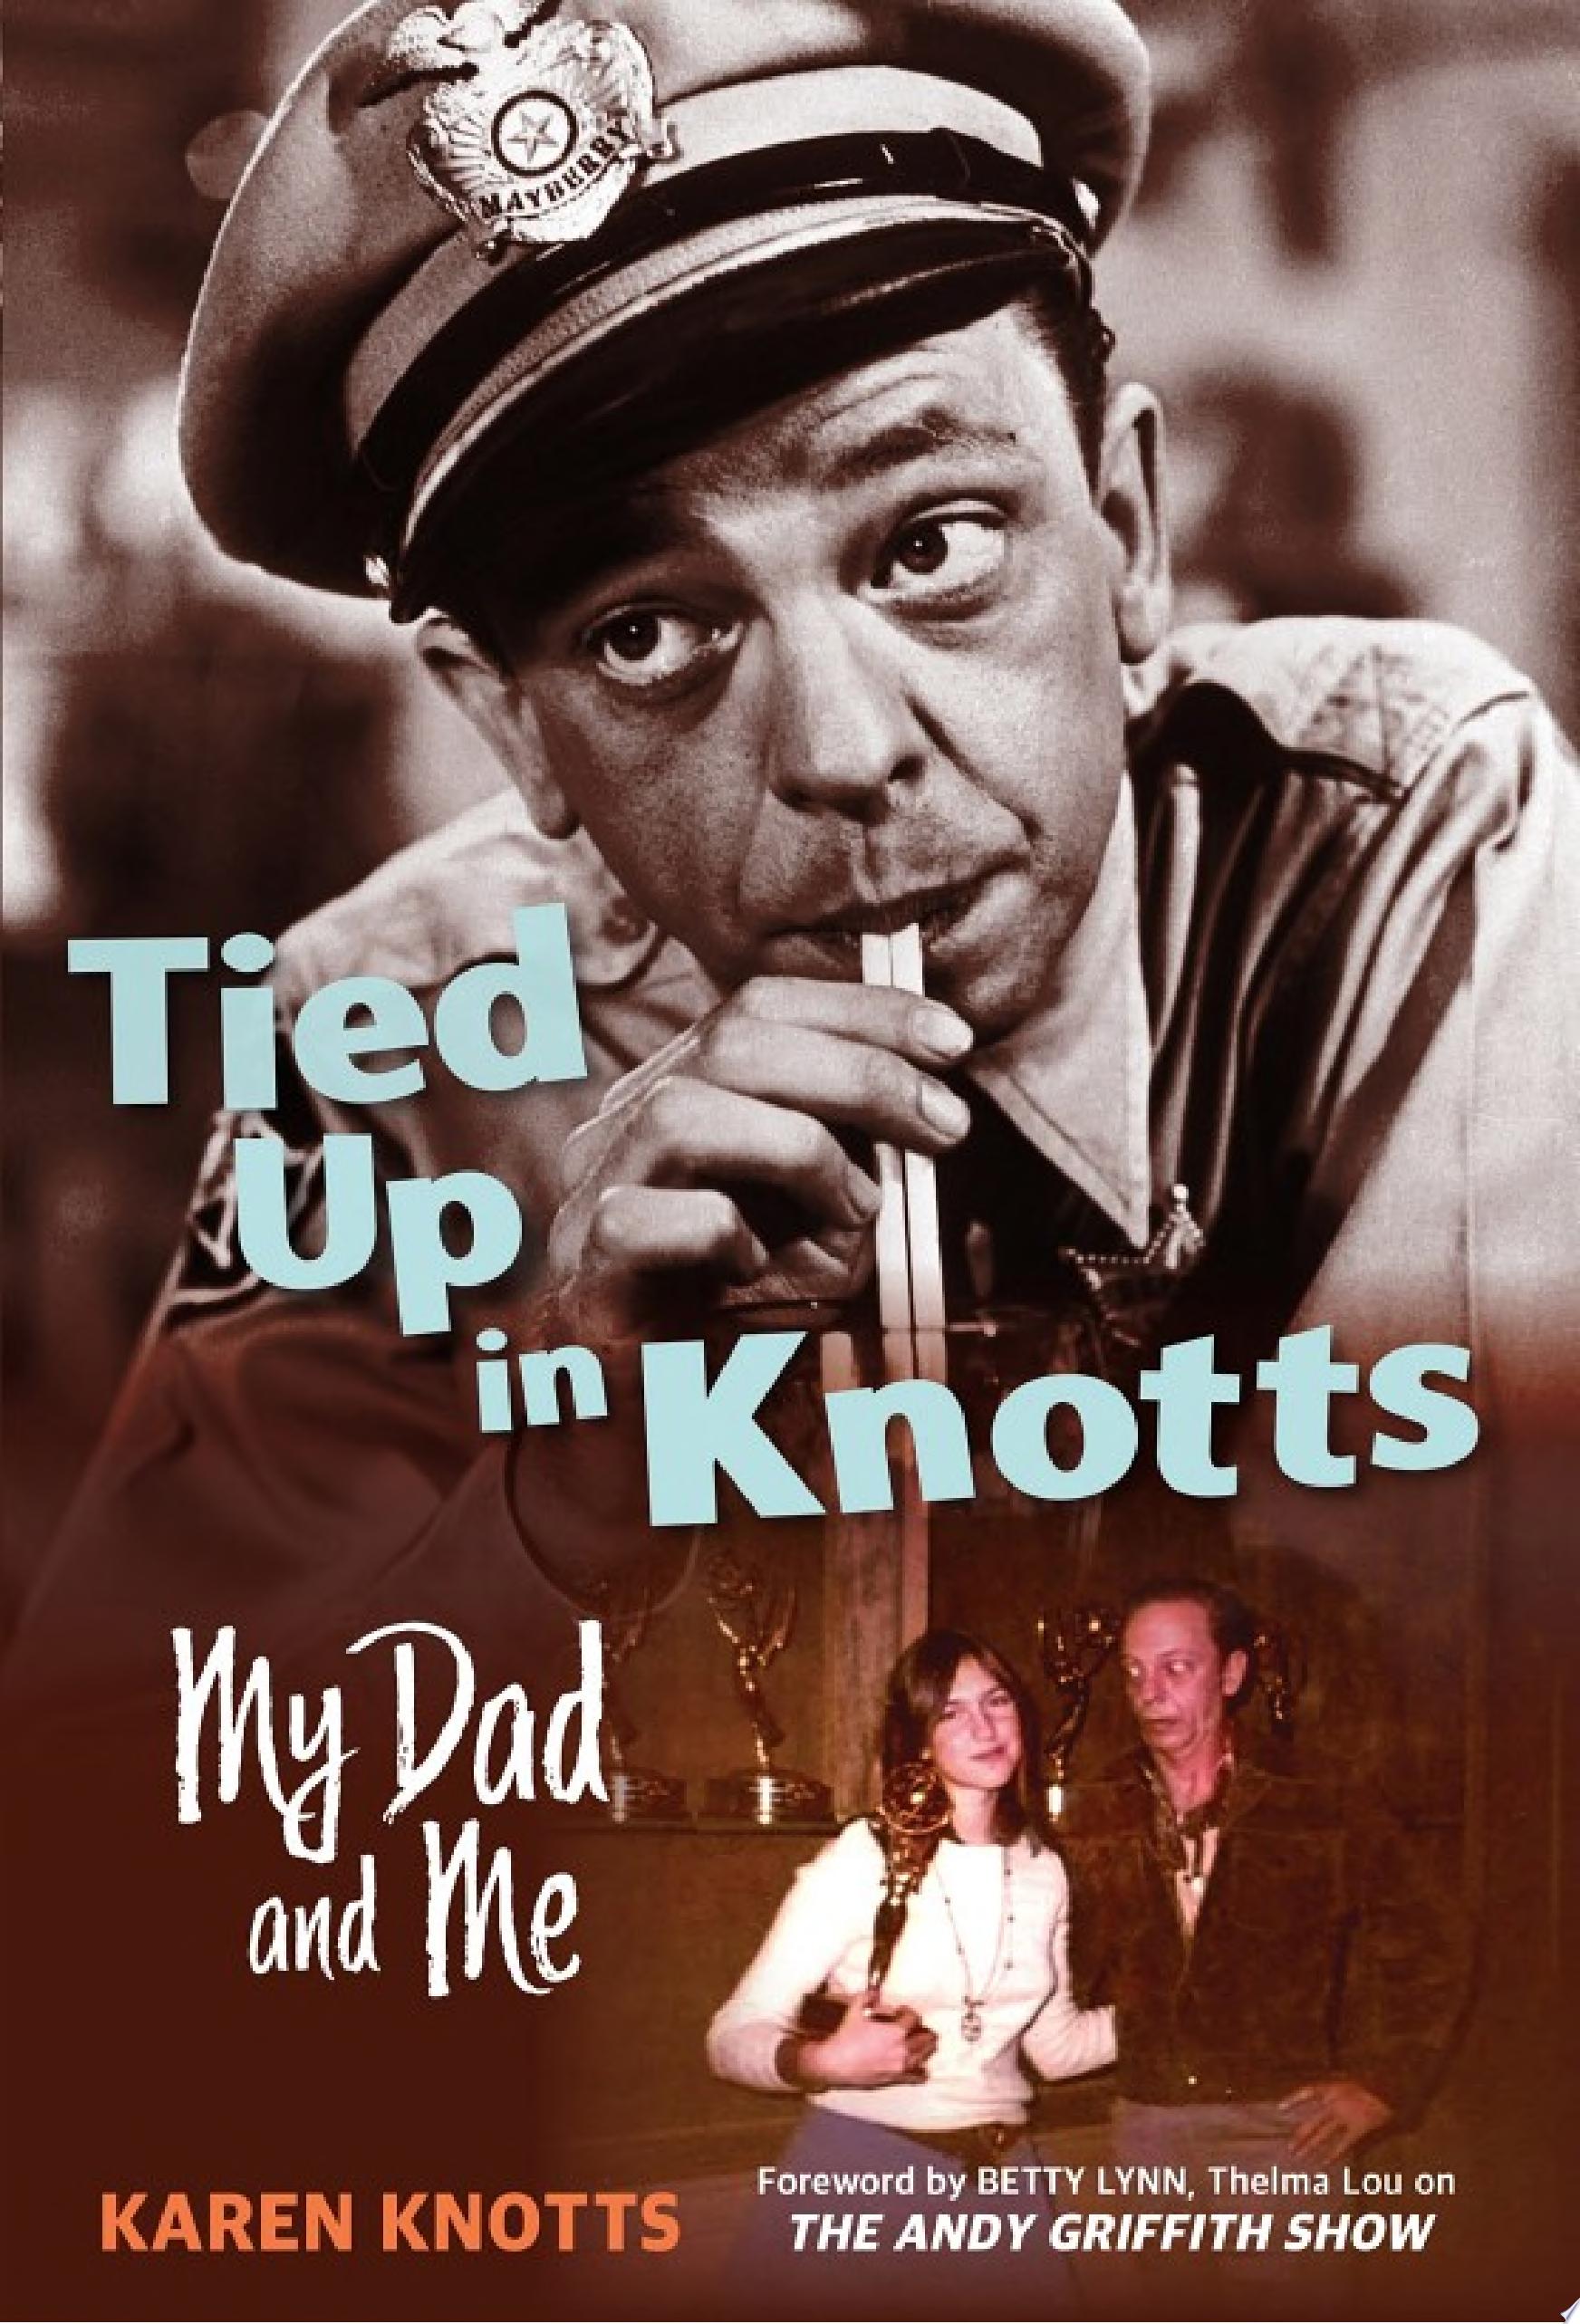 Image for "Tied Up in Knotts"